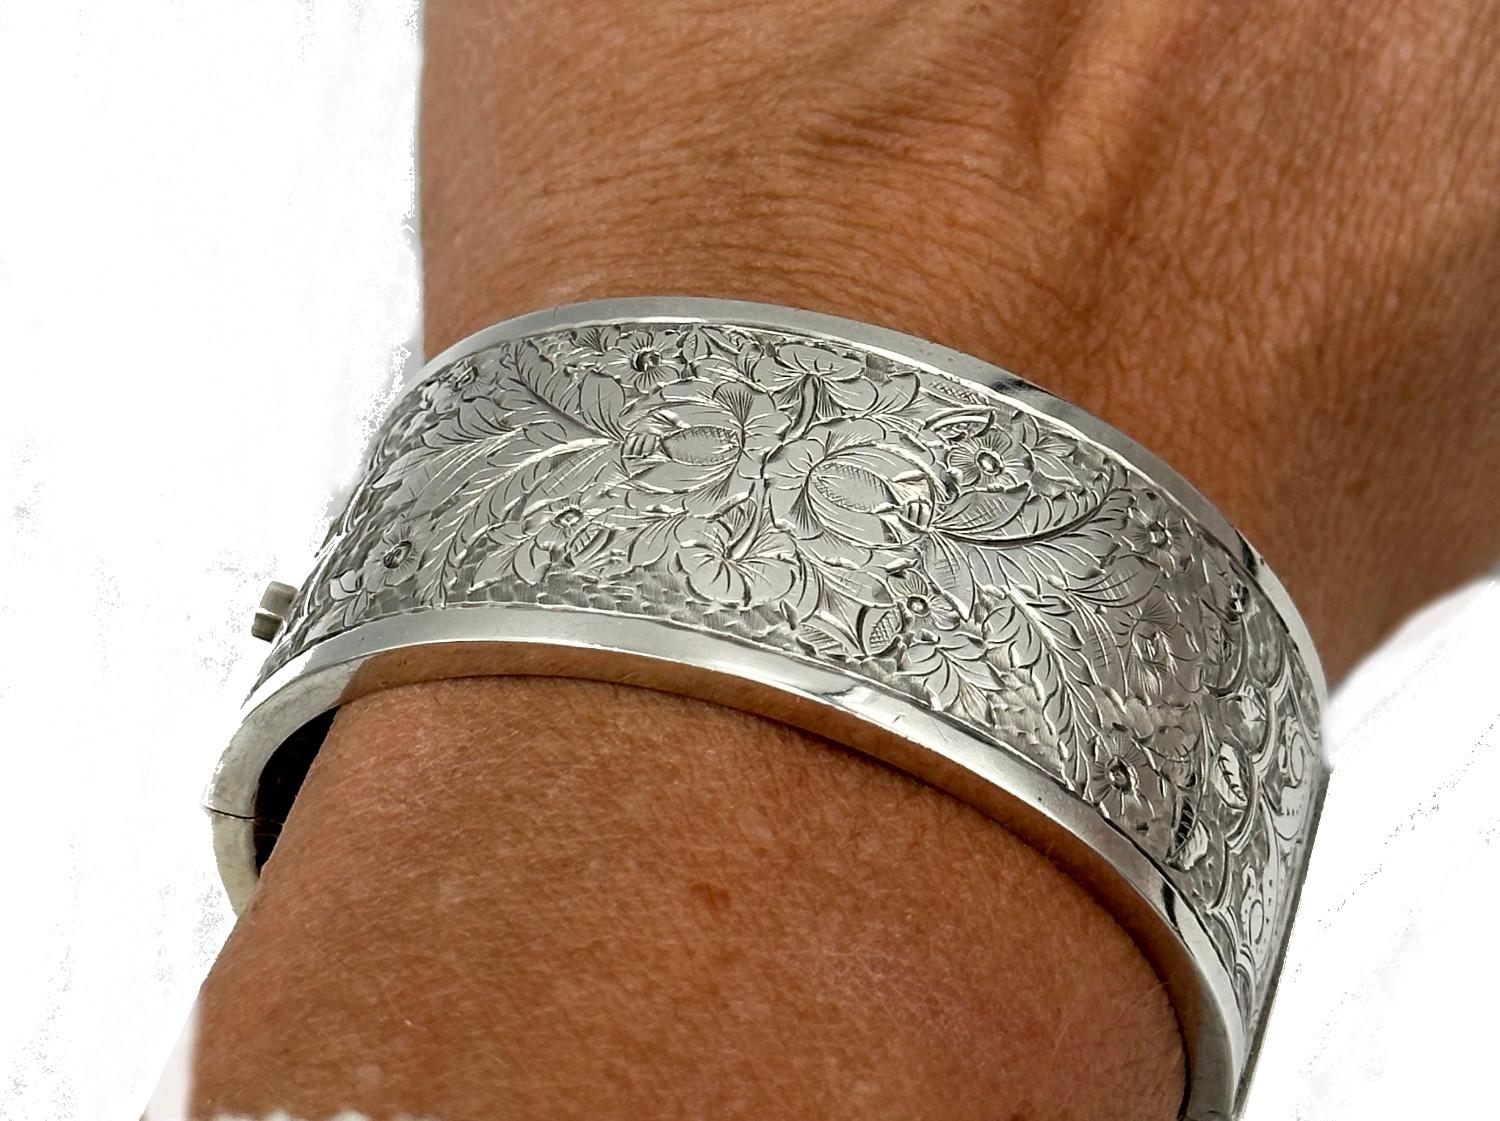 Antique Double Center Floral Victorian Silver Bangle Cuff Bracelet  In Excellent Condition For Sale In Sesser, IL